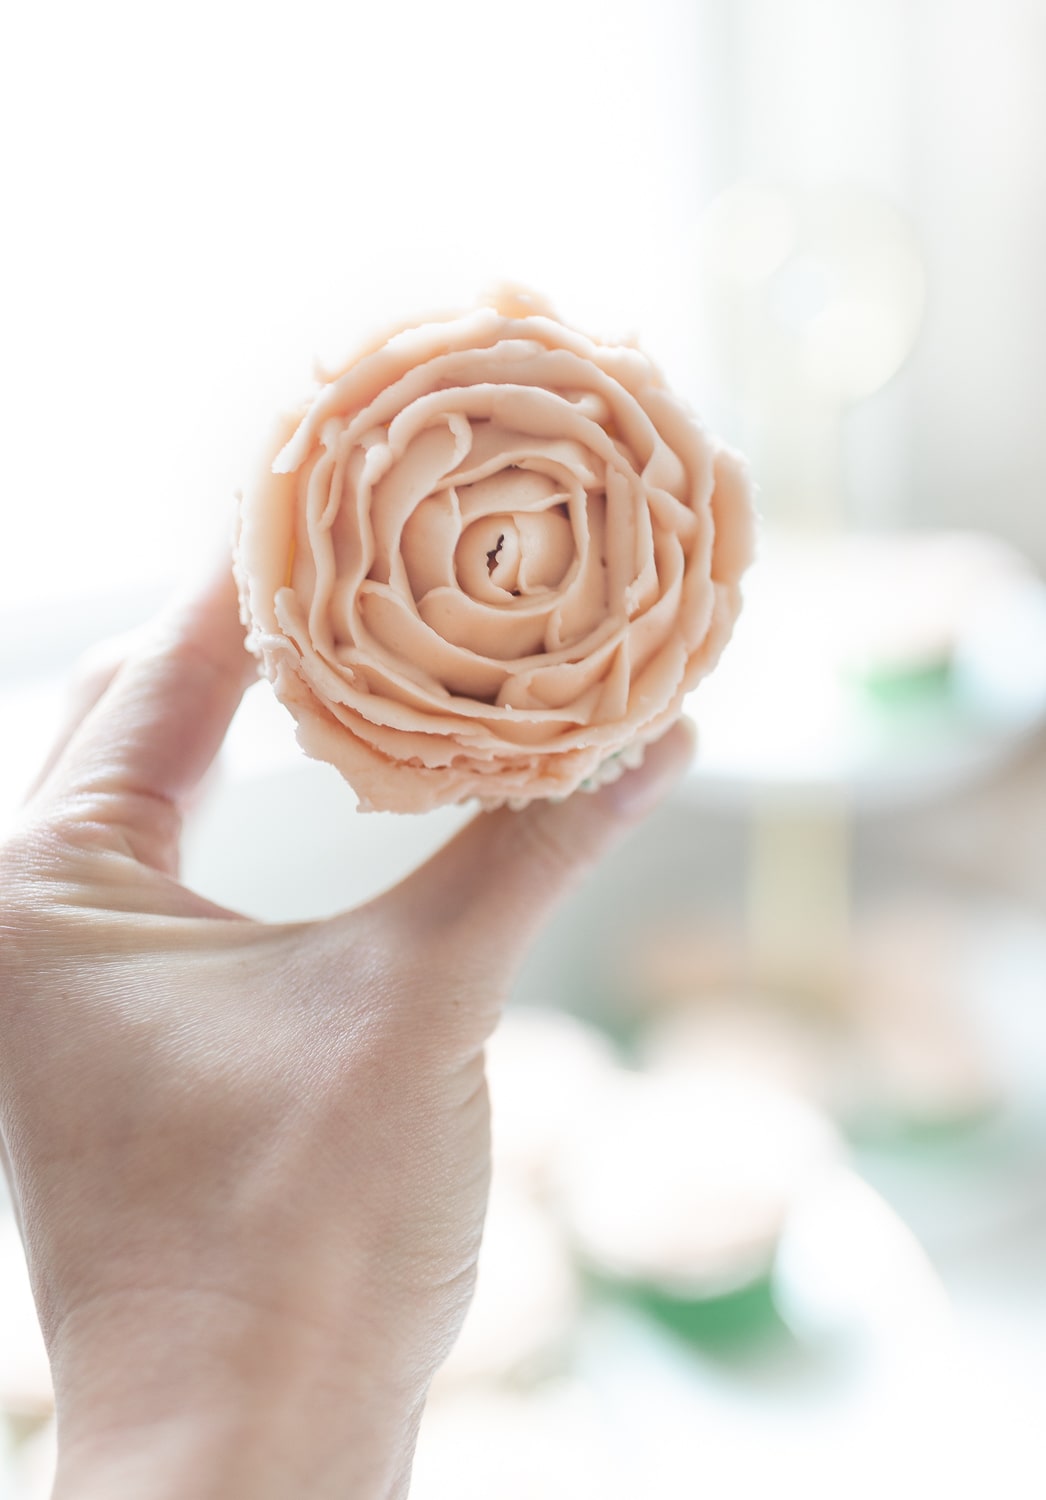 Pink buttercream roses piped onto a mint julep cupcake baked by blogger Stephanie Ziajka on Diary of a Debutante